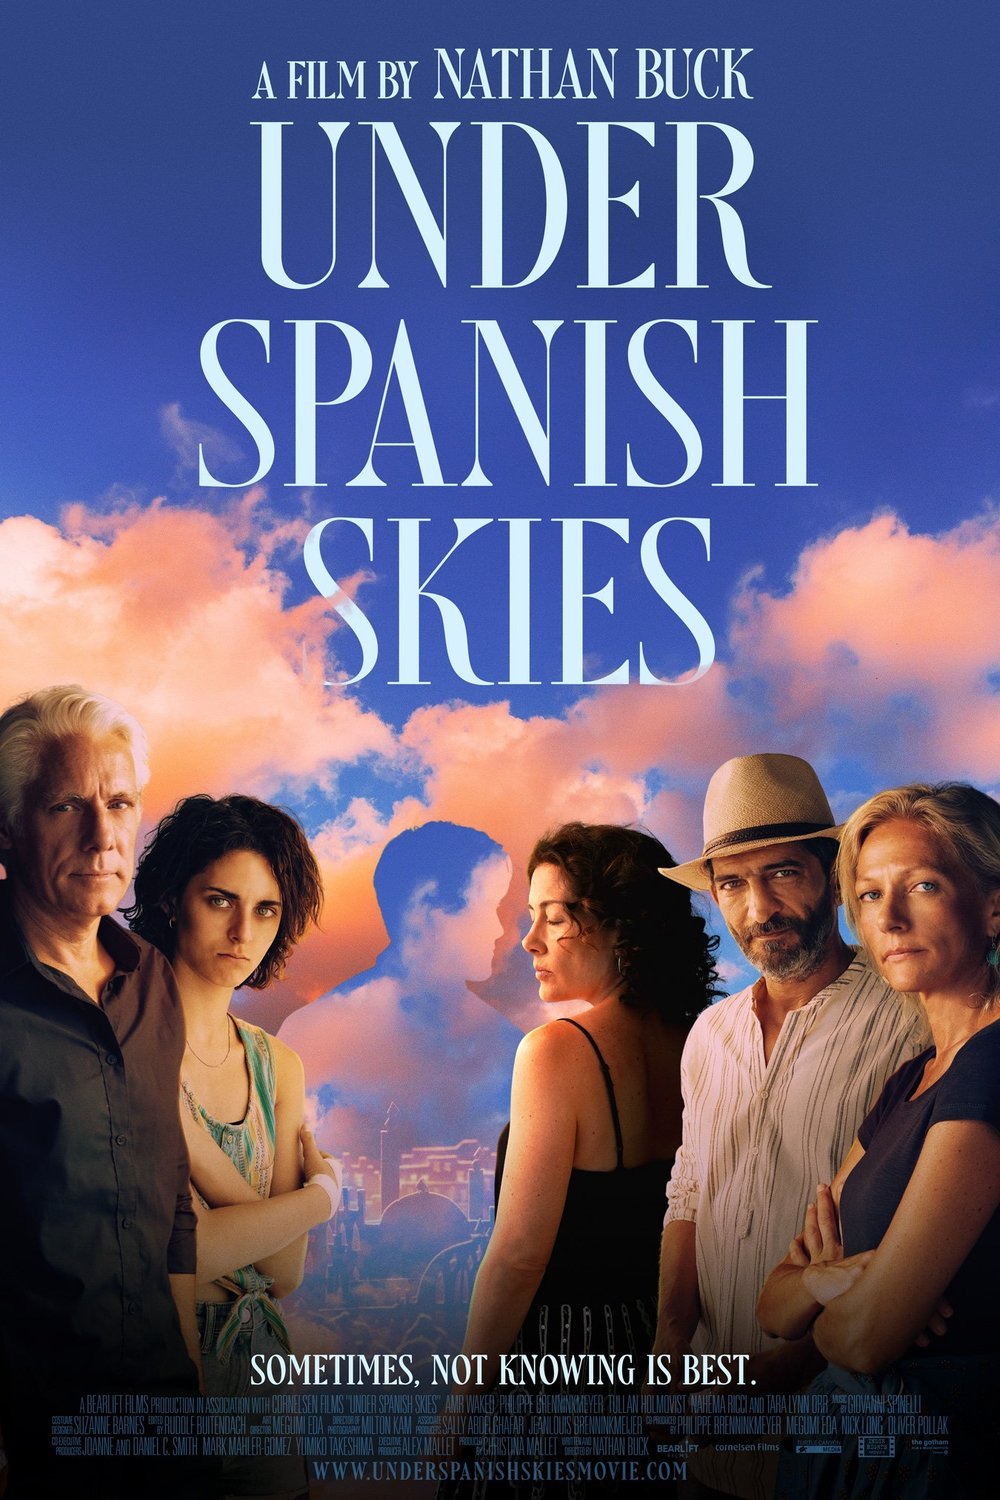 Poster of the movie Under Spanish Skies